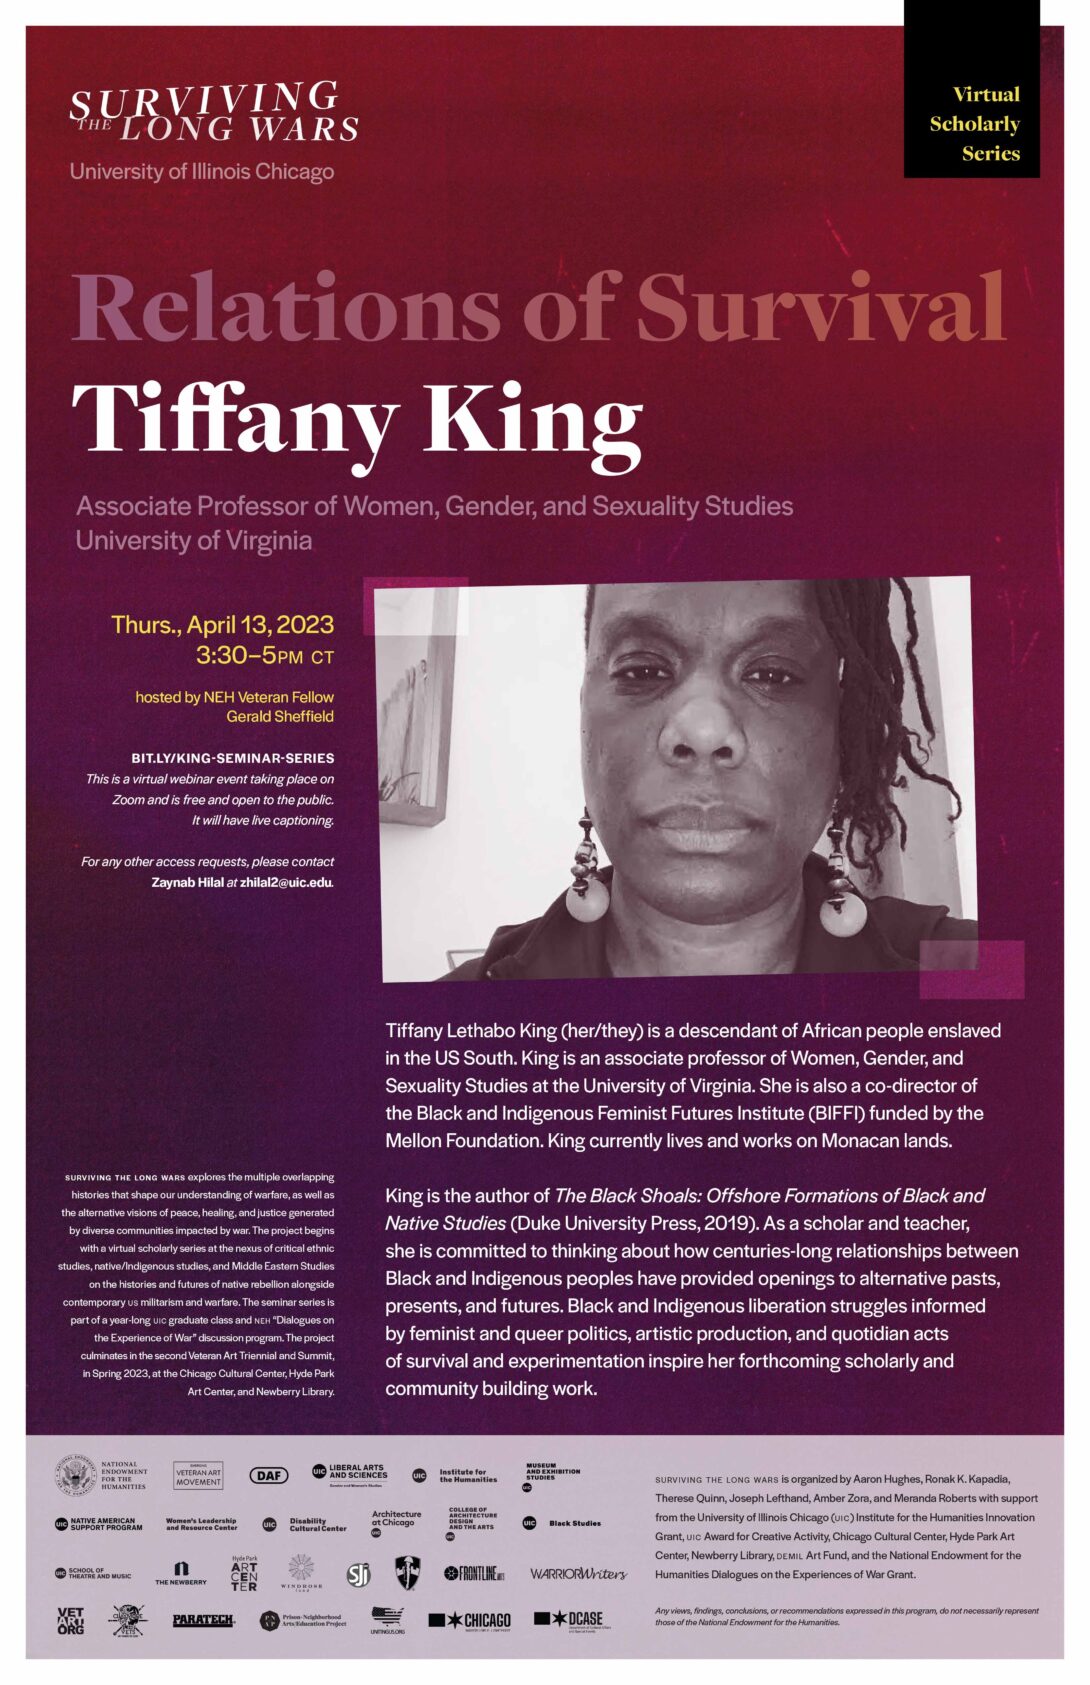 A maroon poster with text announcing a virtual lecture by Tiffany King on Thursday, April 13th. The project’s title 'Surviving the Long Wars' is written in large text at the top of the flyer along with 'Tiffany King'. The poster has a headshot of King, her bio, and details about the series.